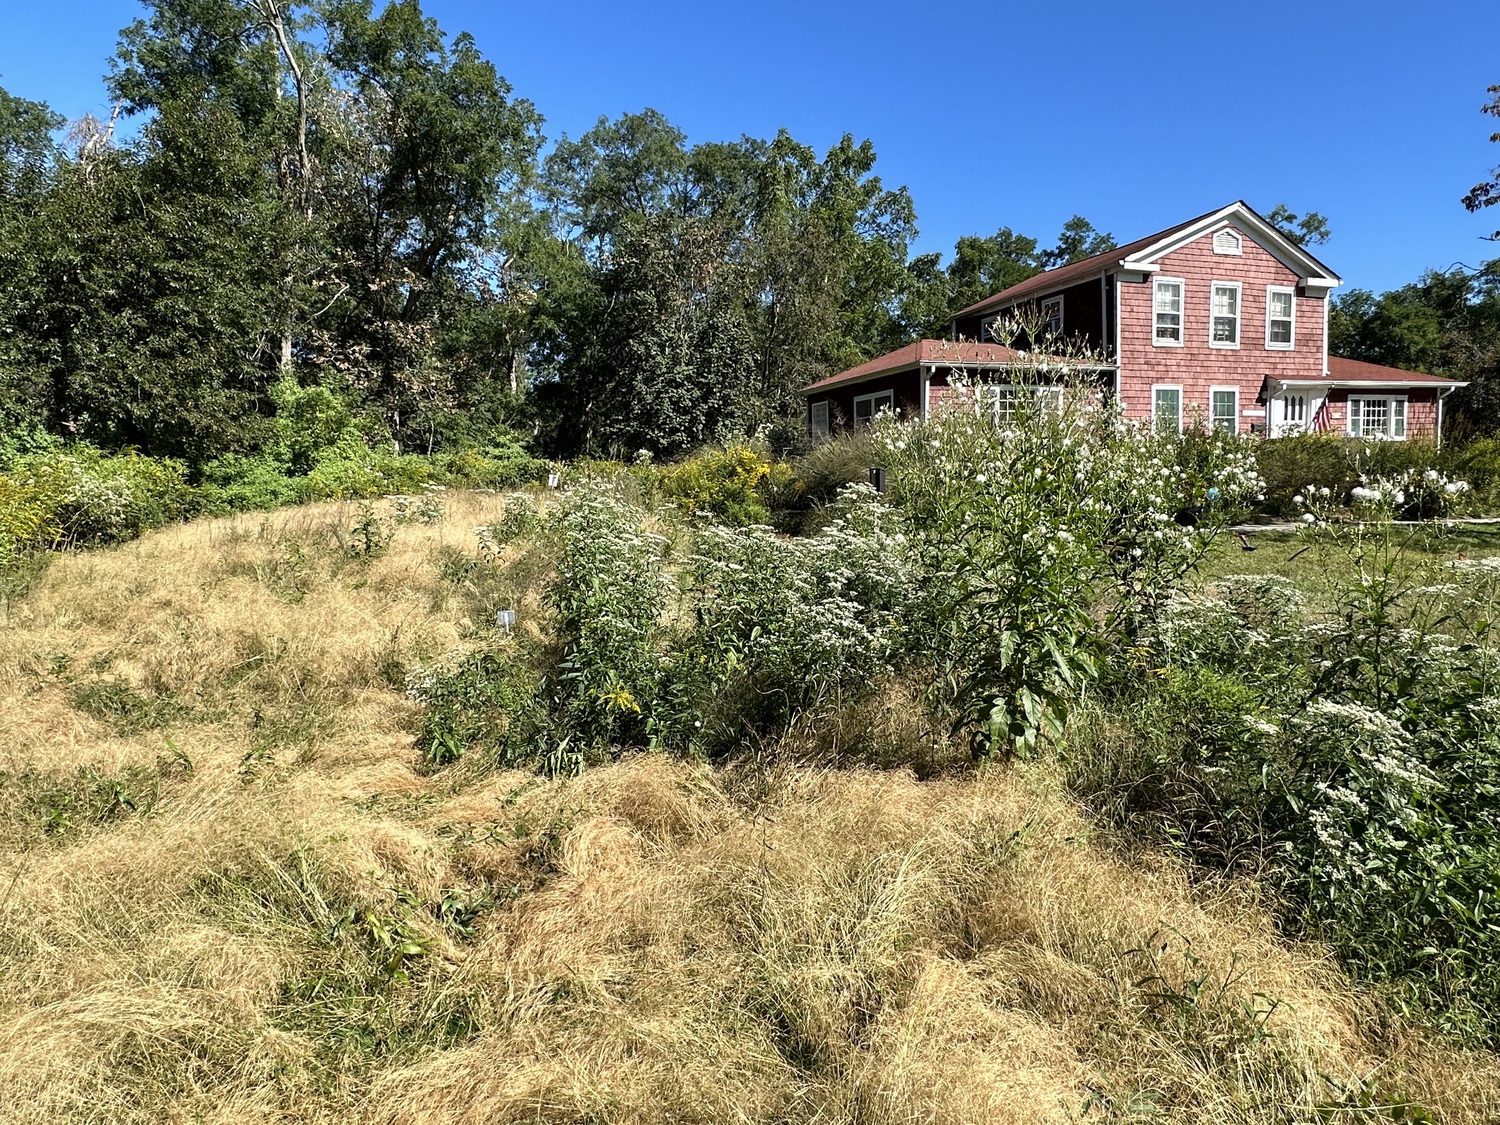 The Roy Latham Nature Center at Inlet Pond County Park in Greenport.